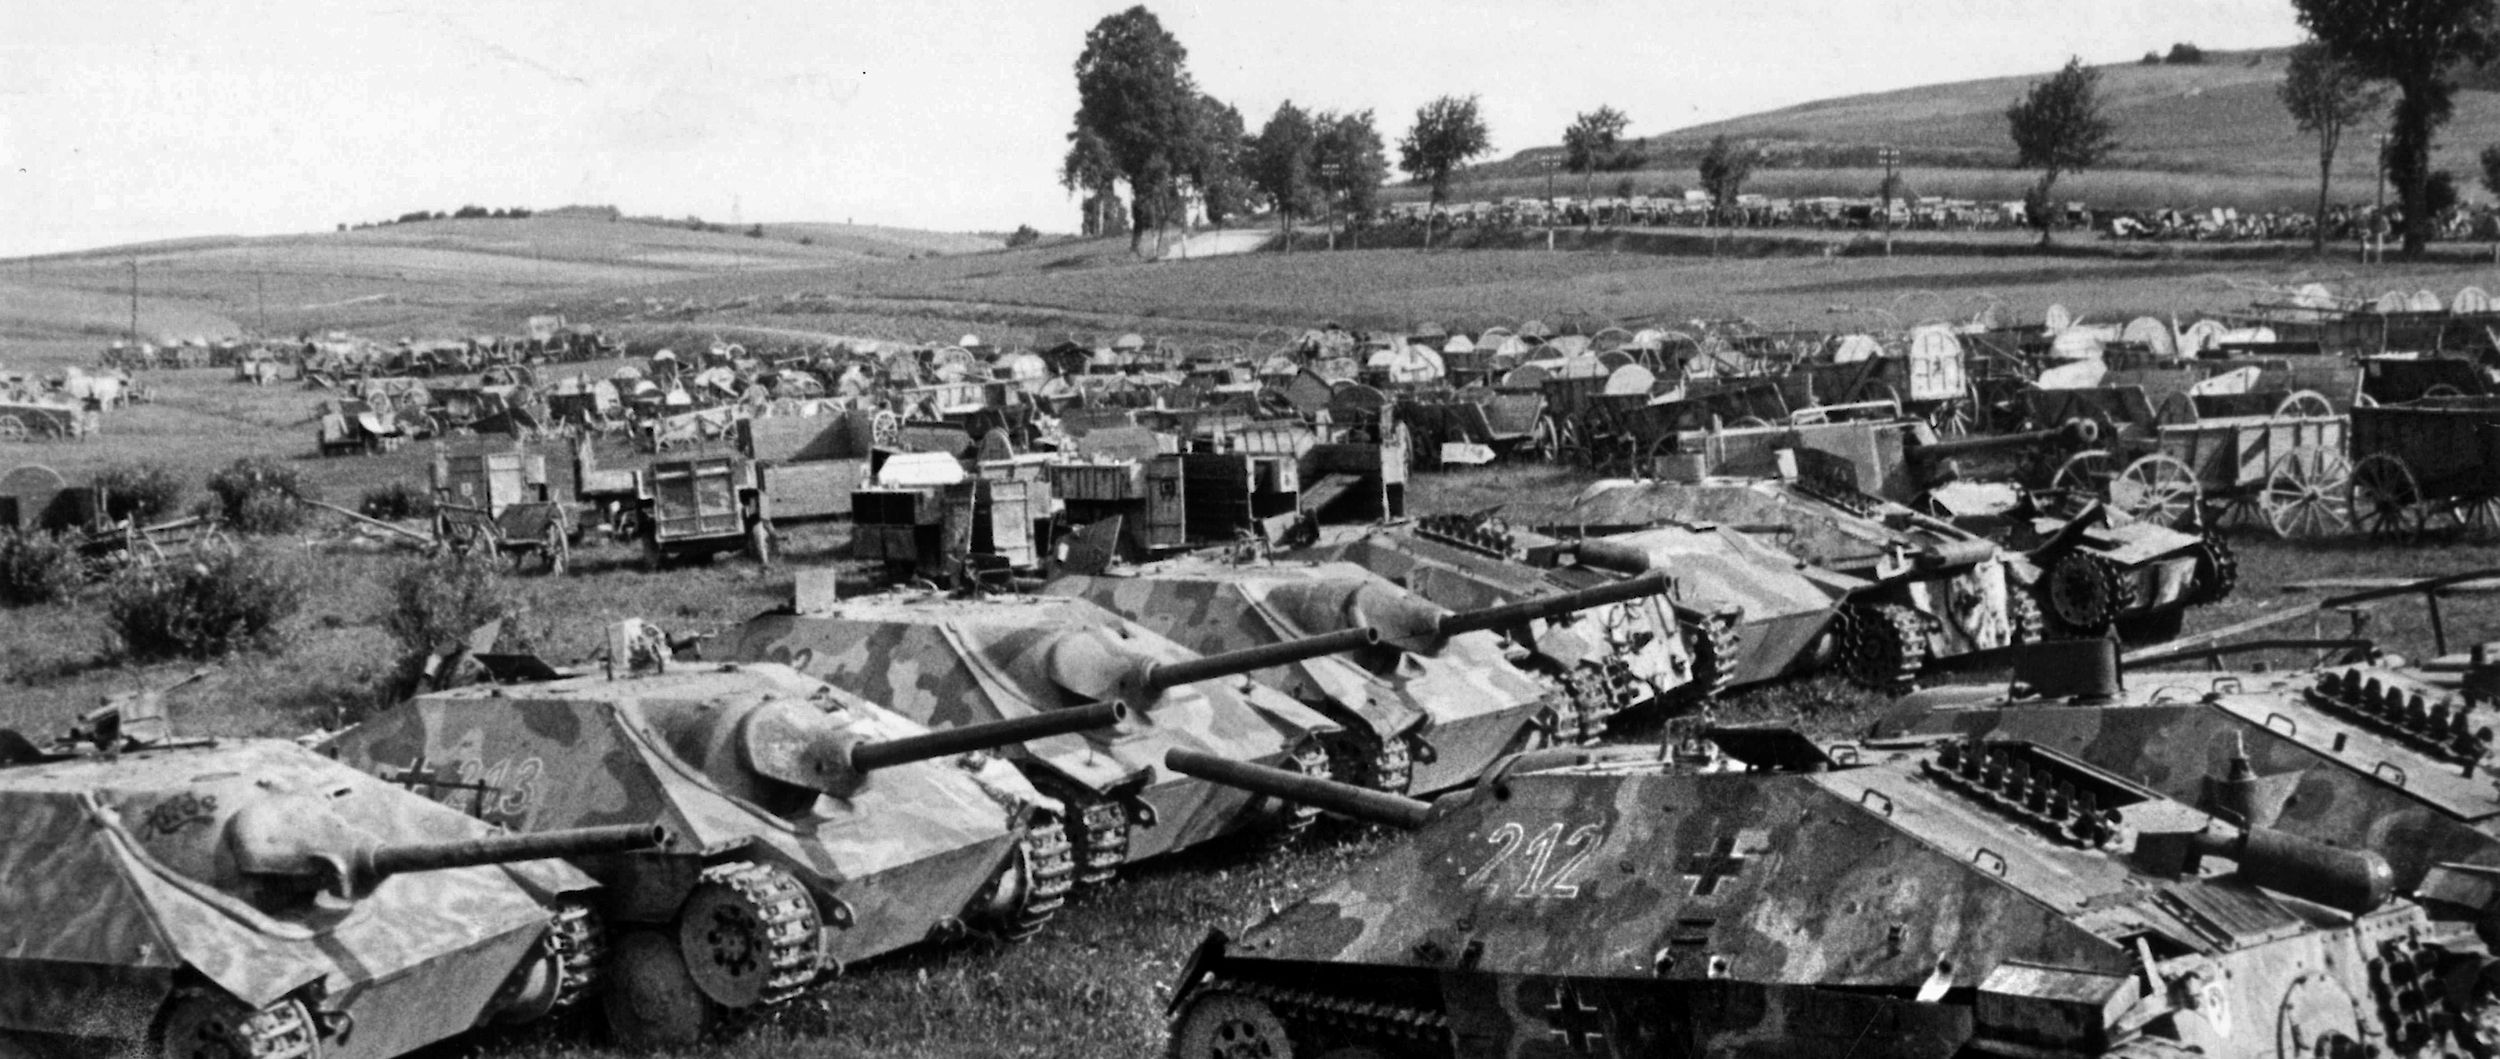 These captured armored vehicles were surrendered to the Soviet Red Army in 1945. Among them are several examples of the Panzerjager 38(t) assault gun, popularly known as the Hetzer and built on the Czech 38(t) chassis. Also built on the Czech 38(t) chassis, a Marder III is visible at right. Horse-drawn wagons are shown toward the rear.